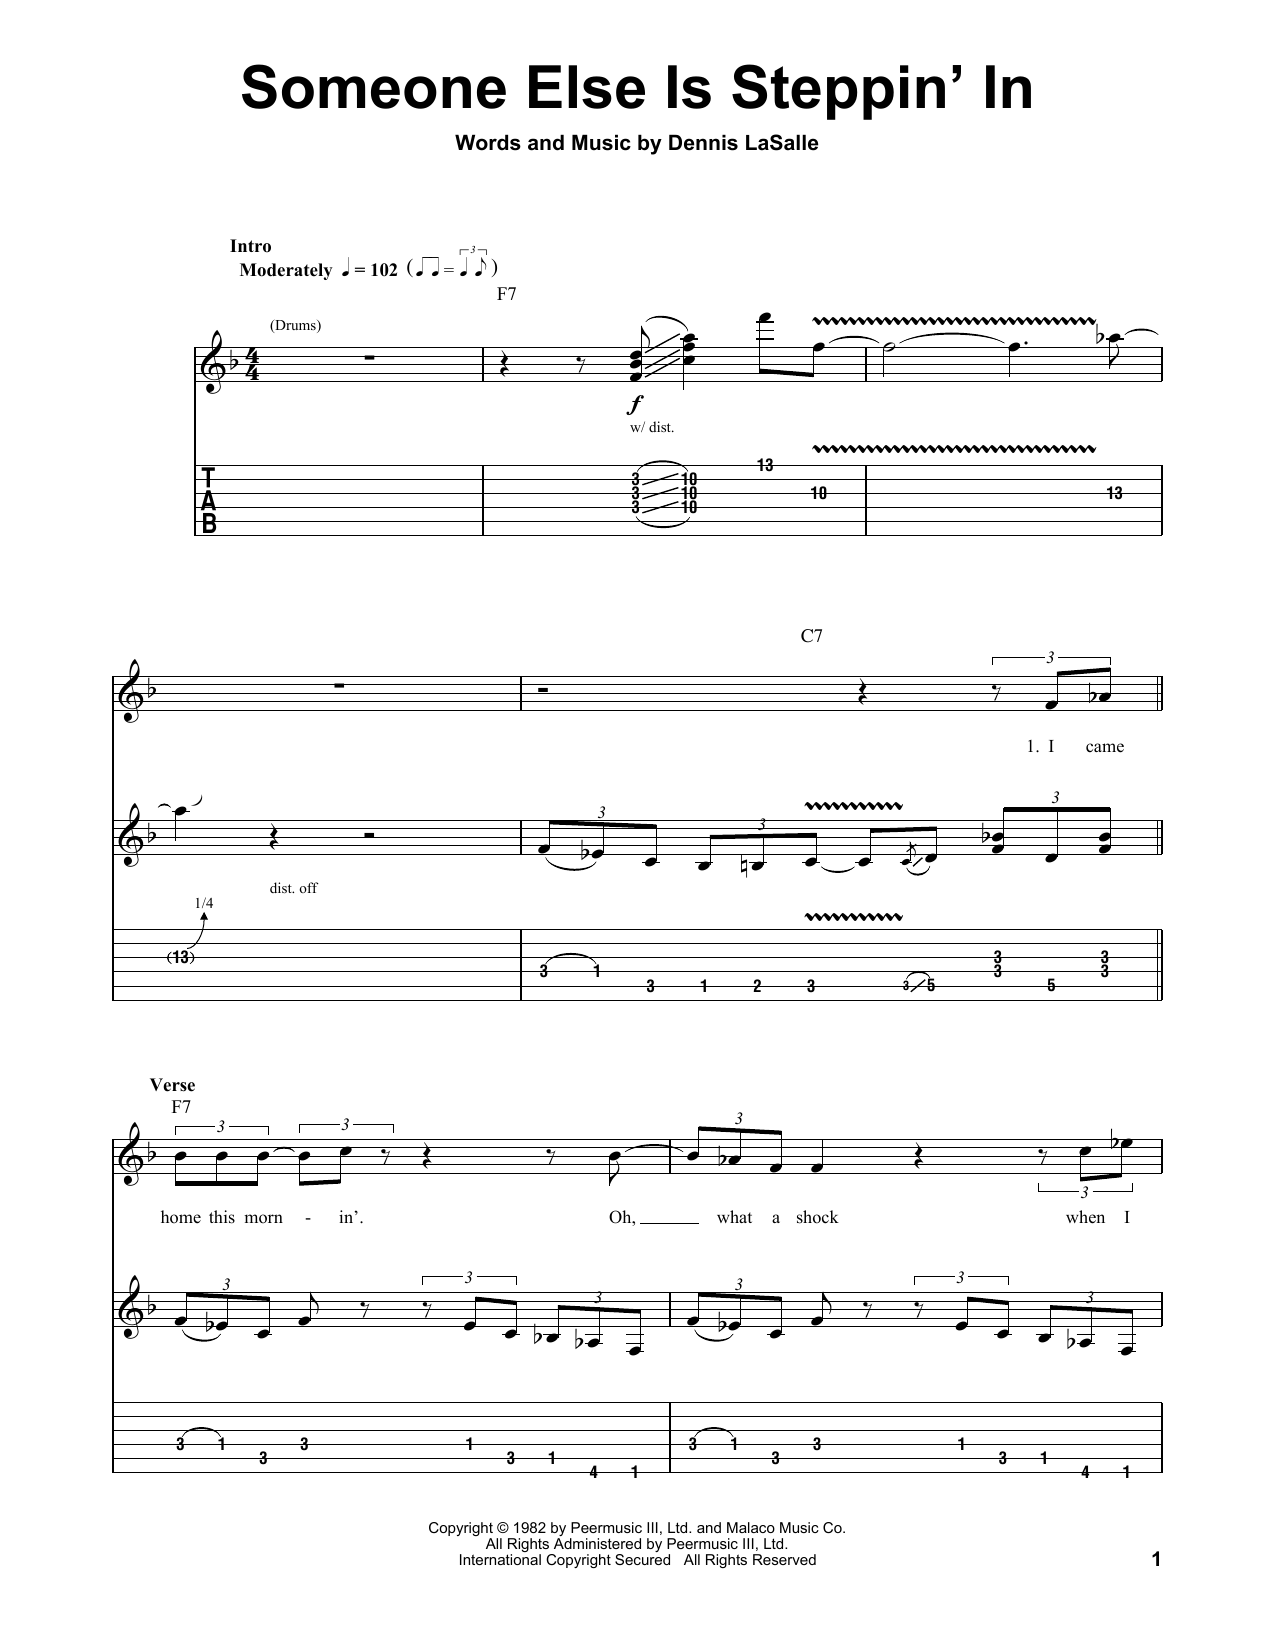 Download Buddy Guy Someone Else Is Steppin' In Sheet Music